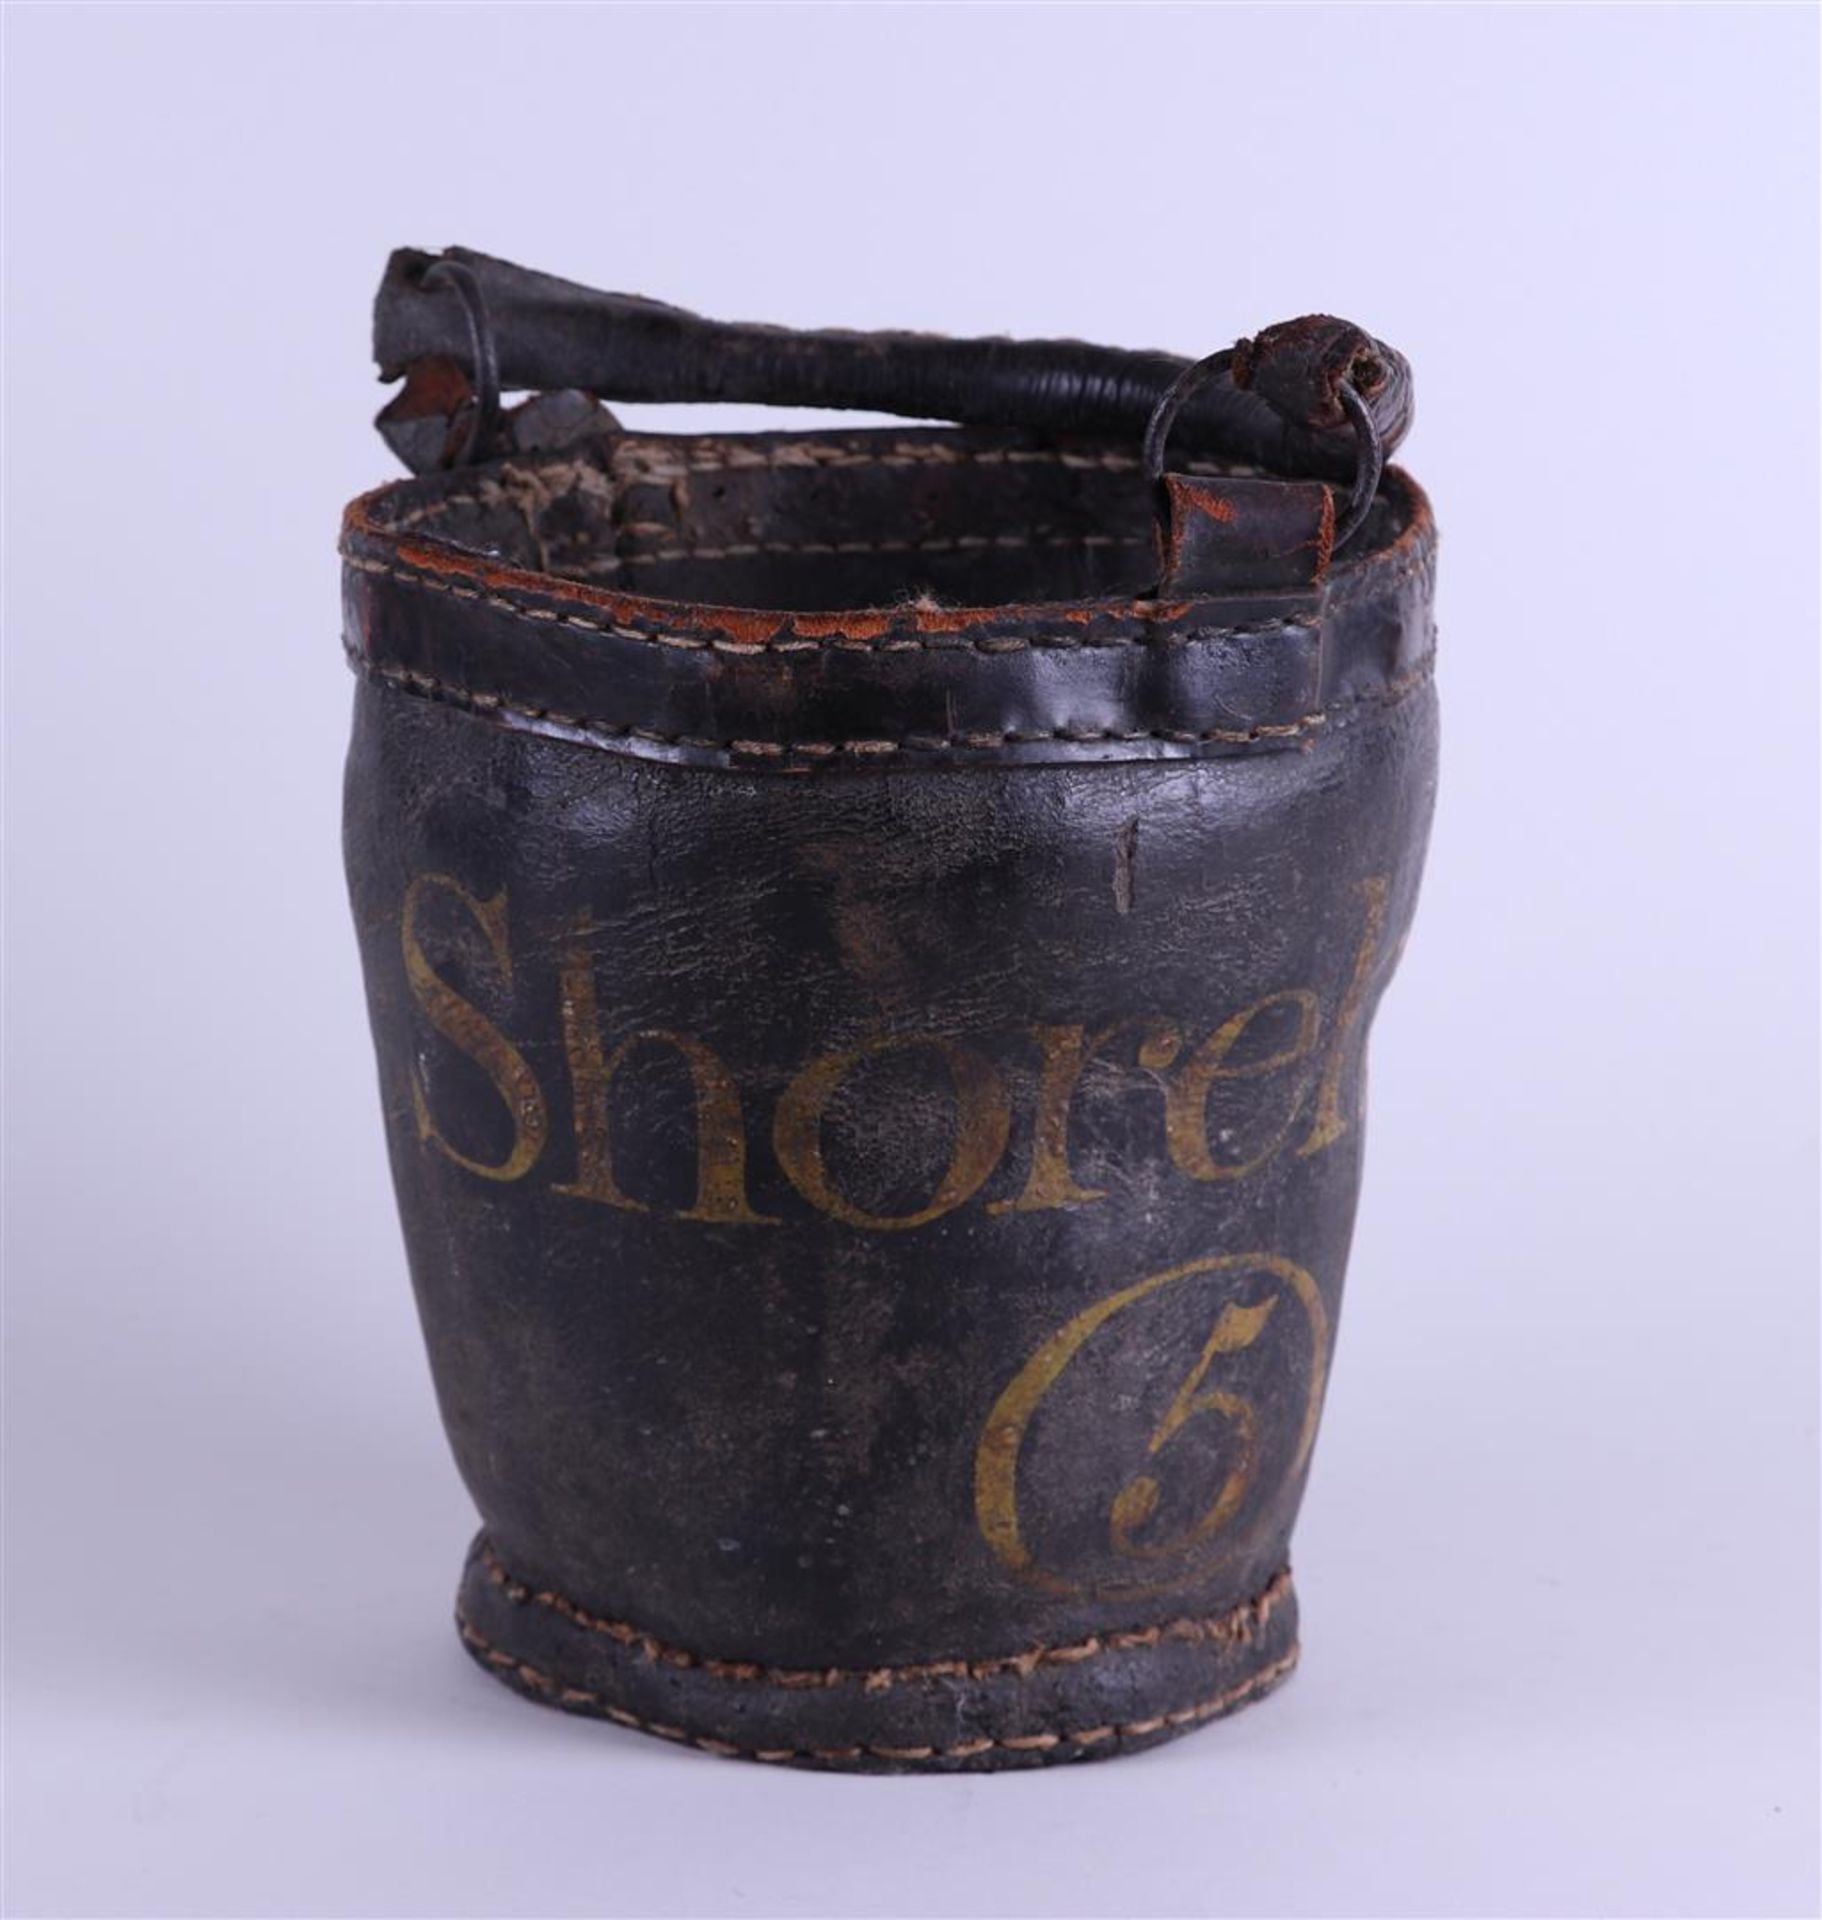 A leather firefighter's lake with 'shoreham' inscription. Early 20th century.